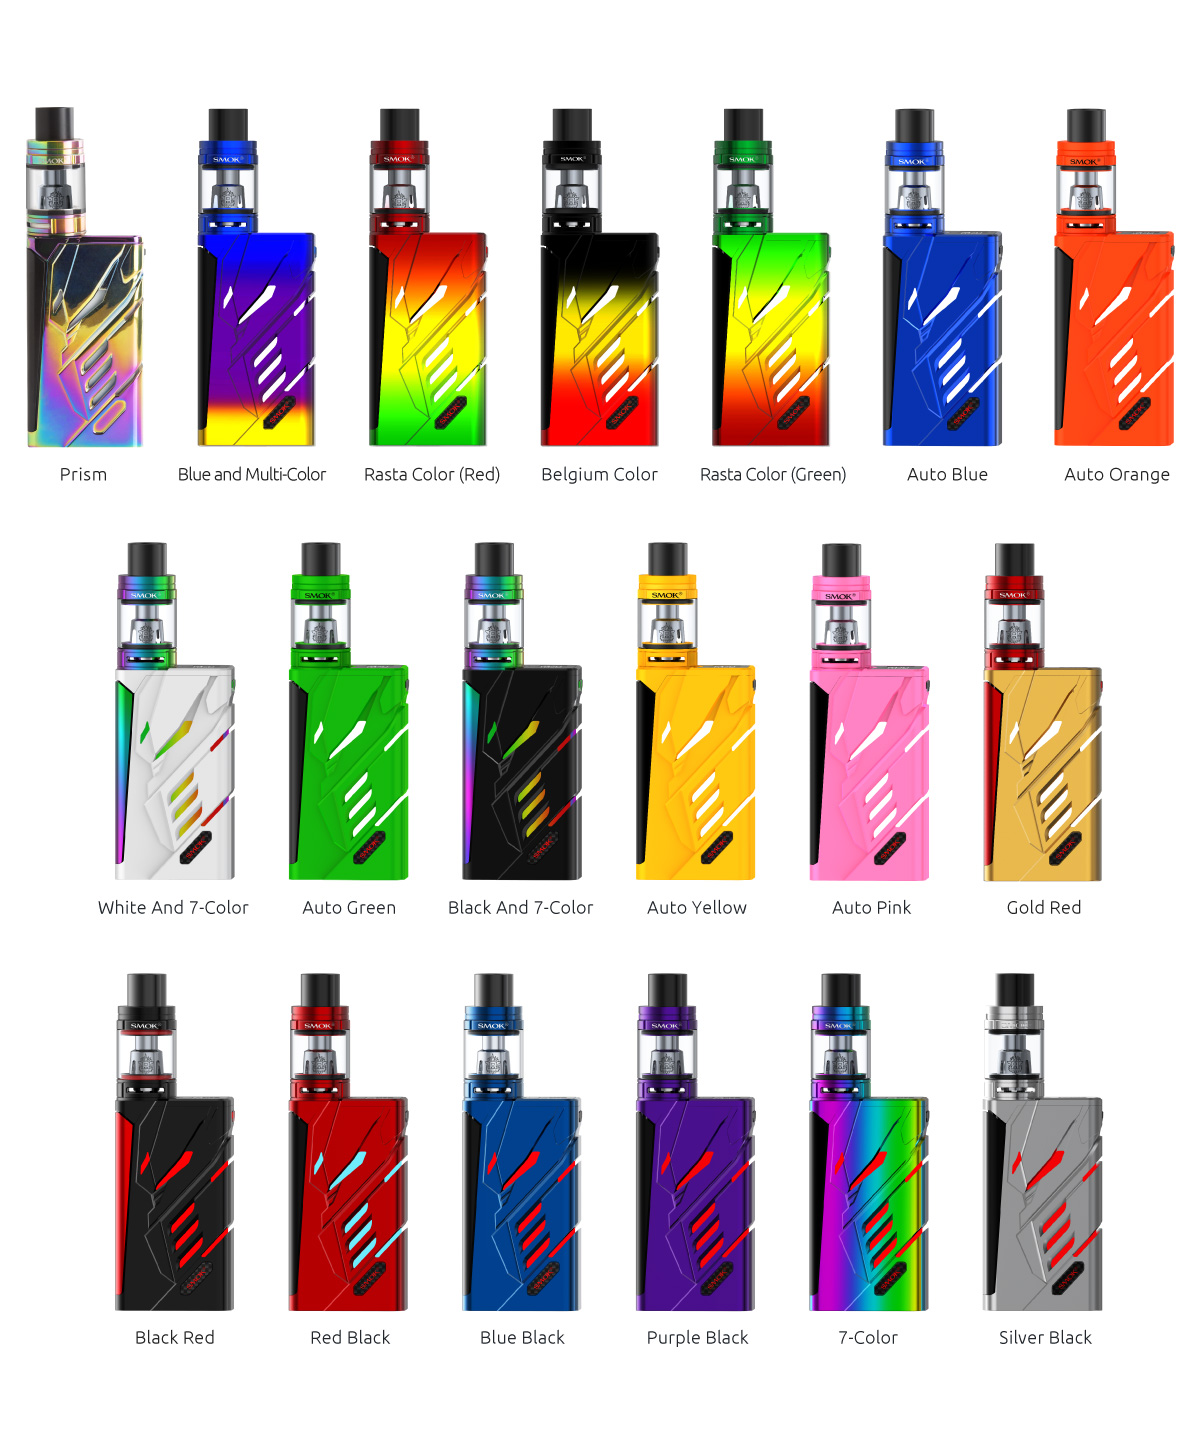 19 Finished Colors Avaliable for SMOK T-Priv Kit